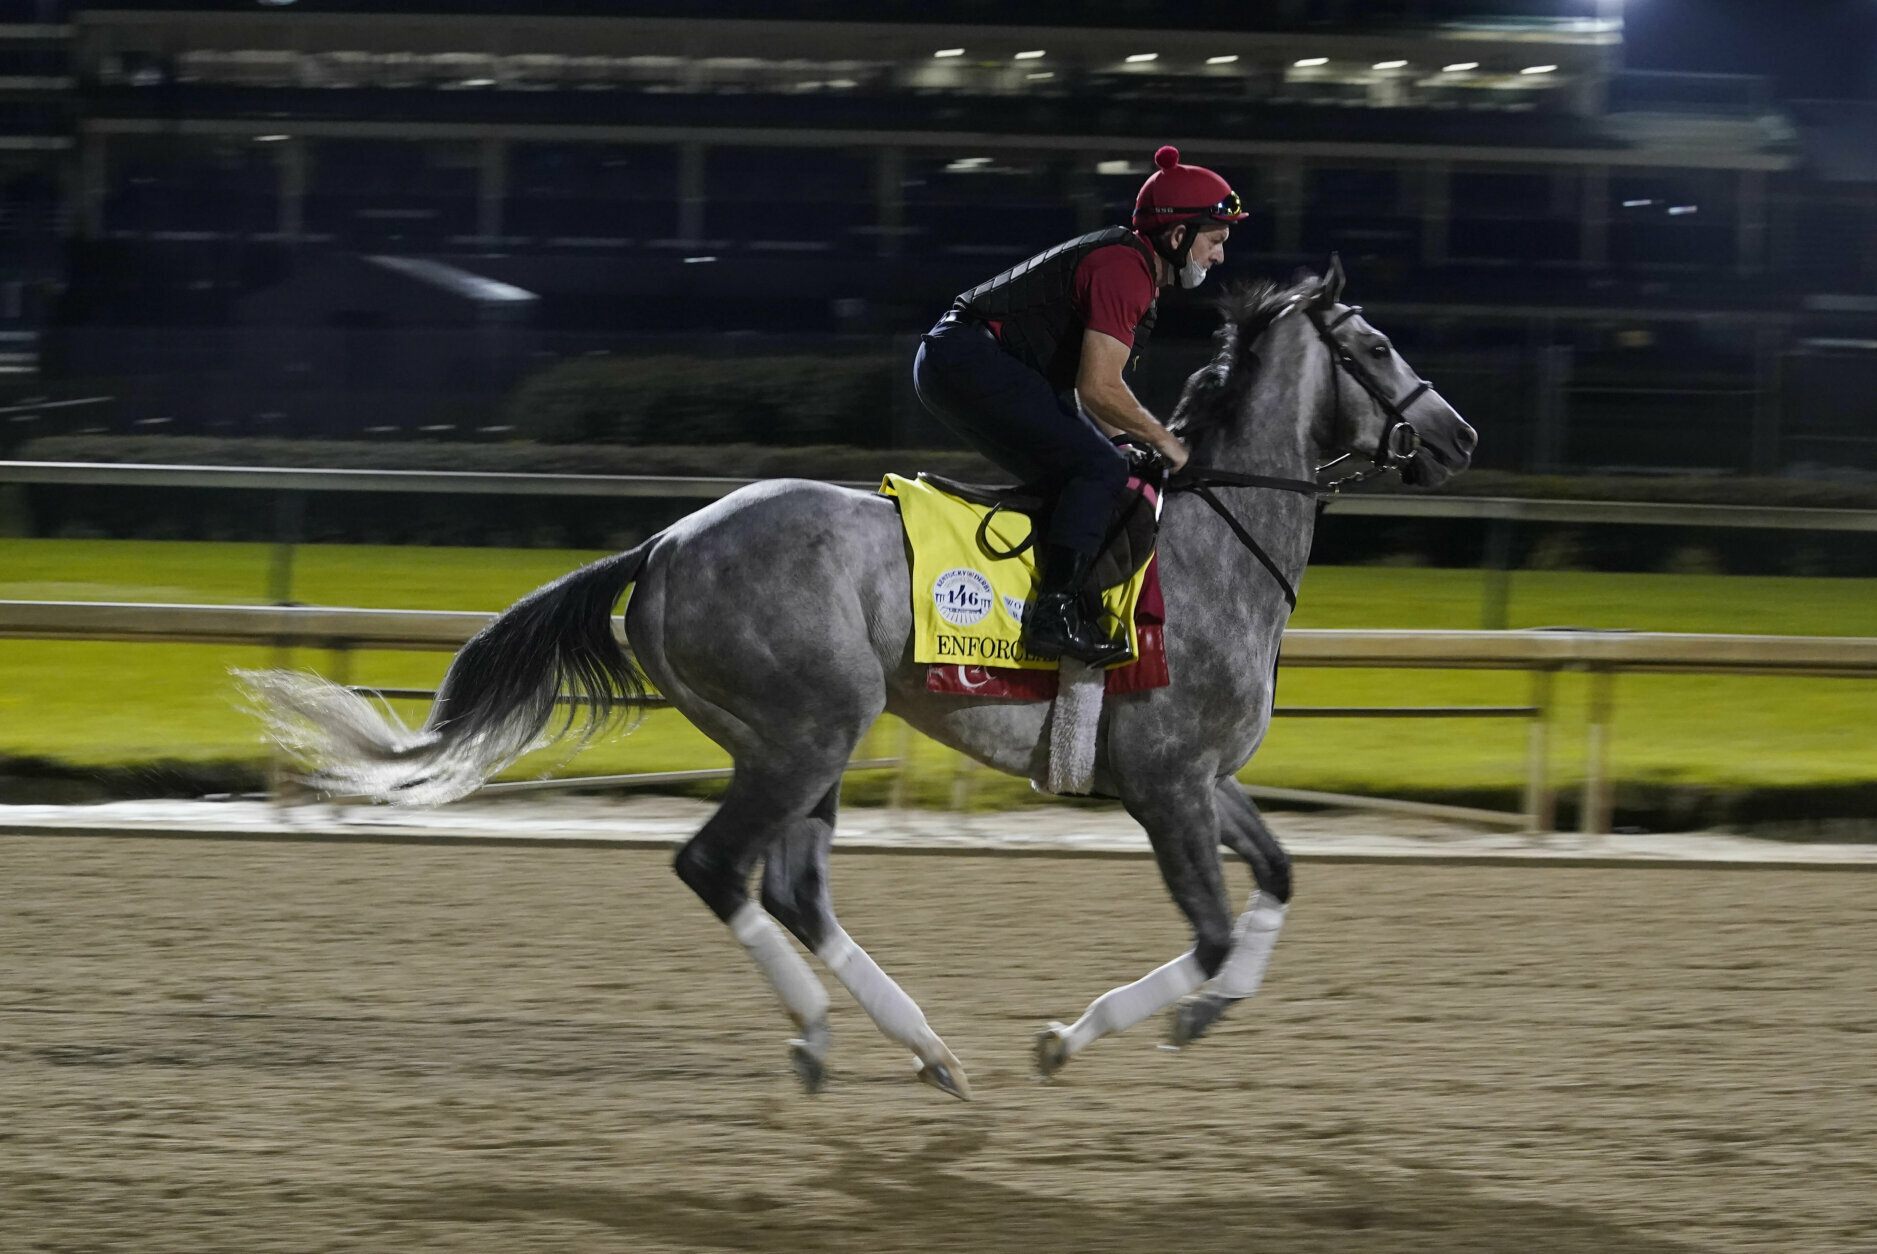 Kentucky Derby entry Enforceable runs during a workout at Churchill Downs, Friday, Sept. 4, 2020, in Louisville, Ky. The Kentucky Derby is scheduled for Saturday, Sept. 5th. (AP Photo/Darron Cummings)